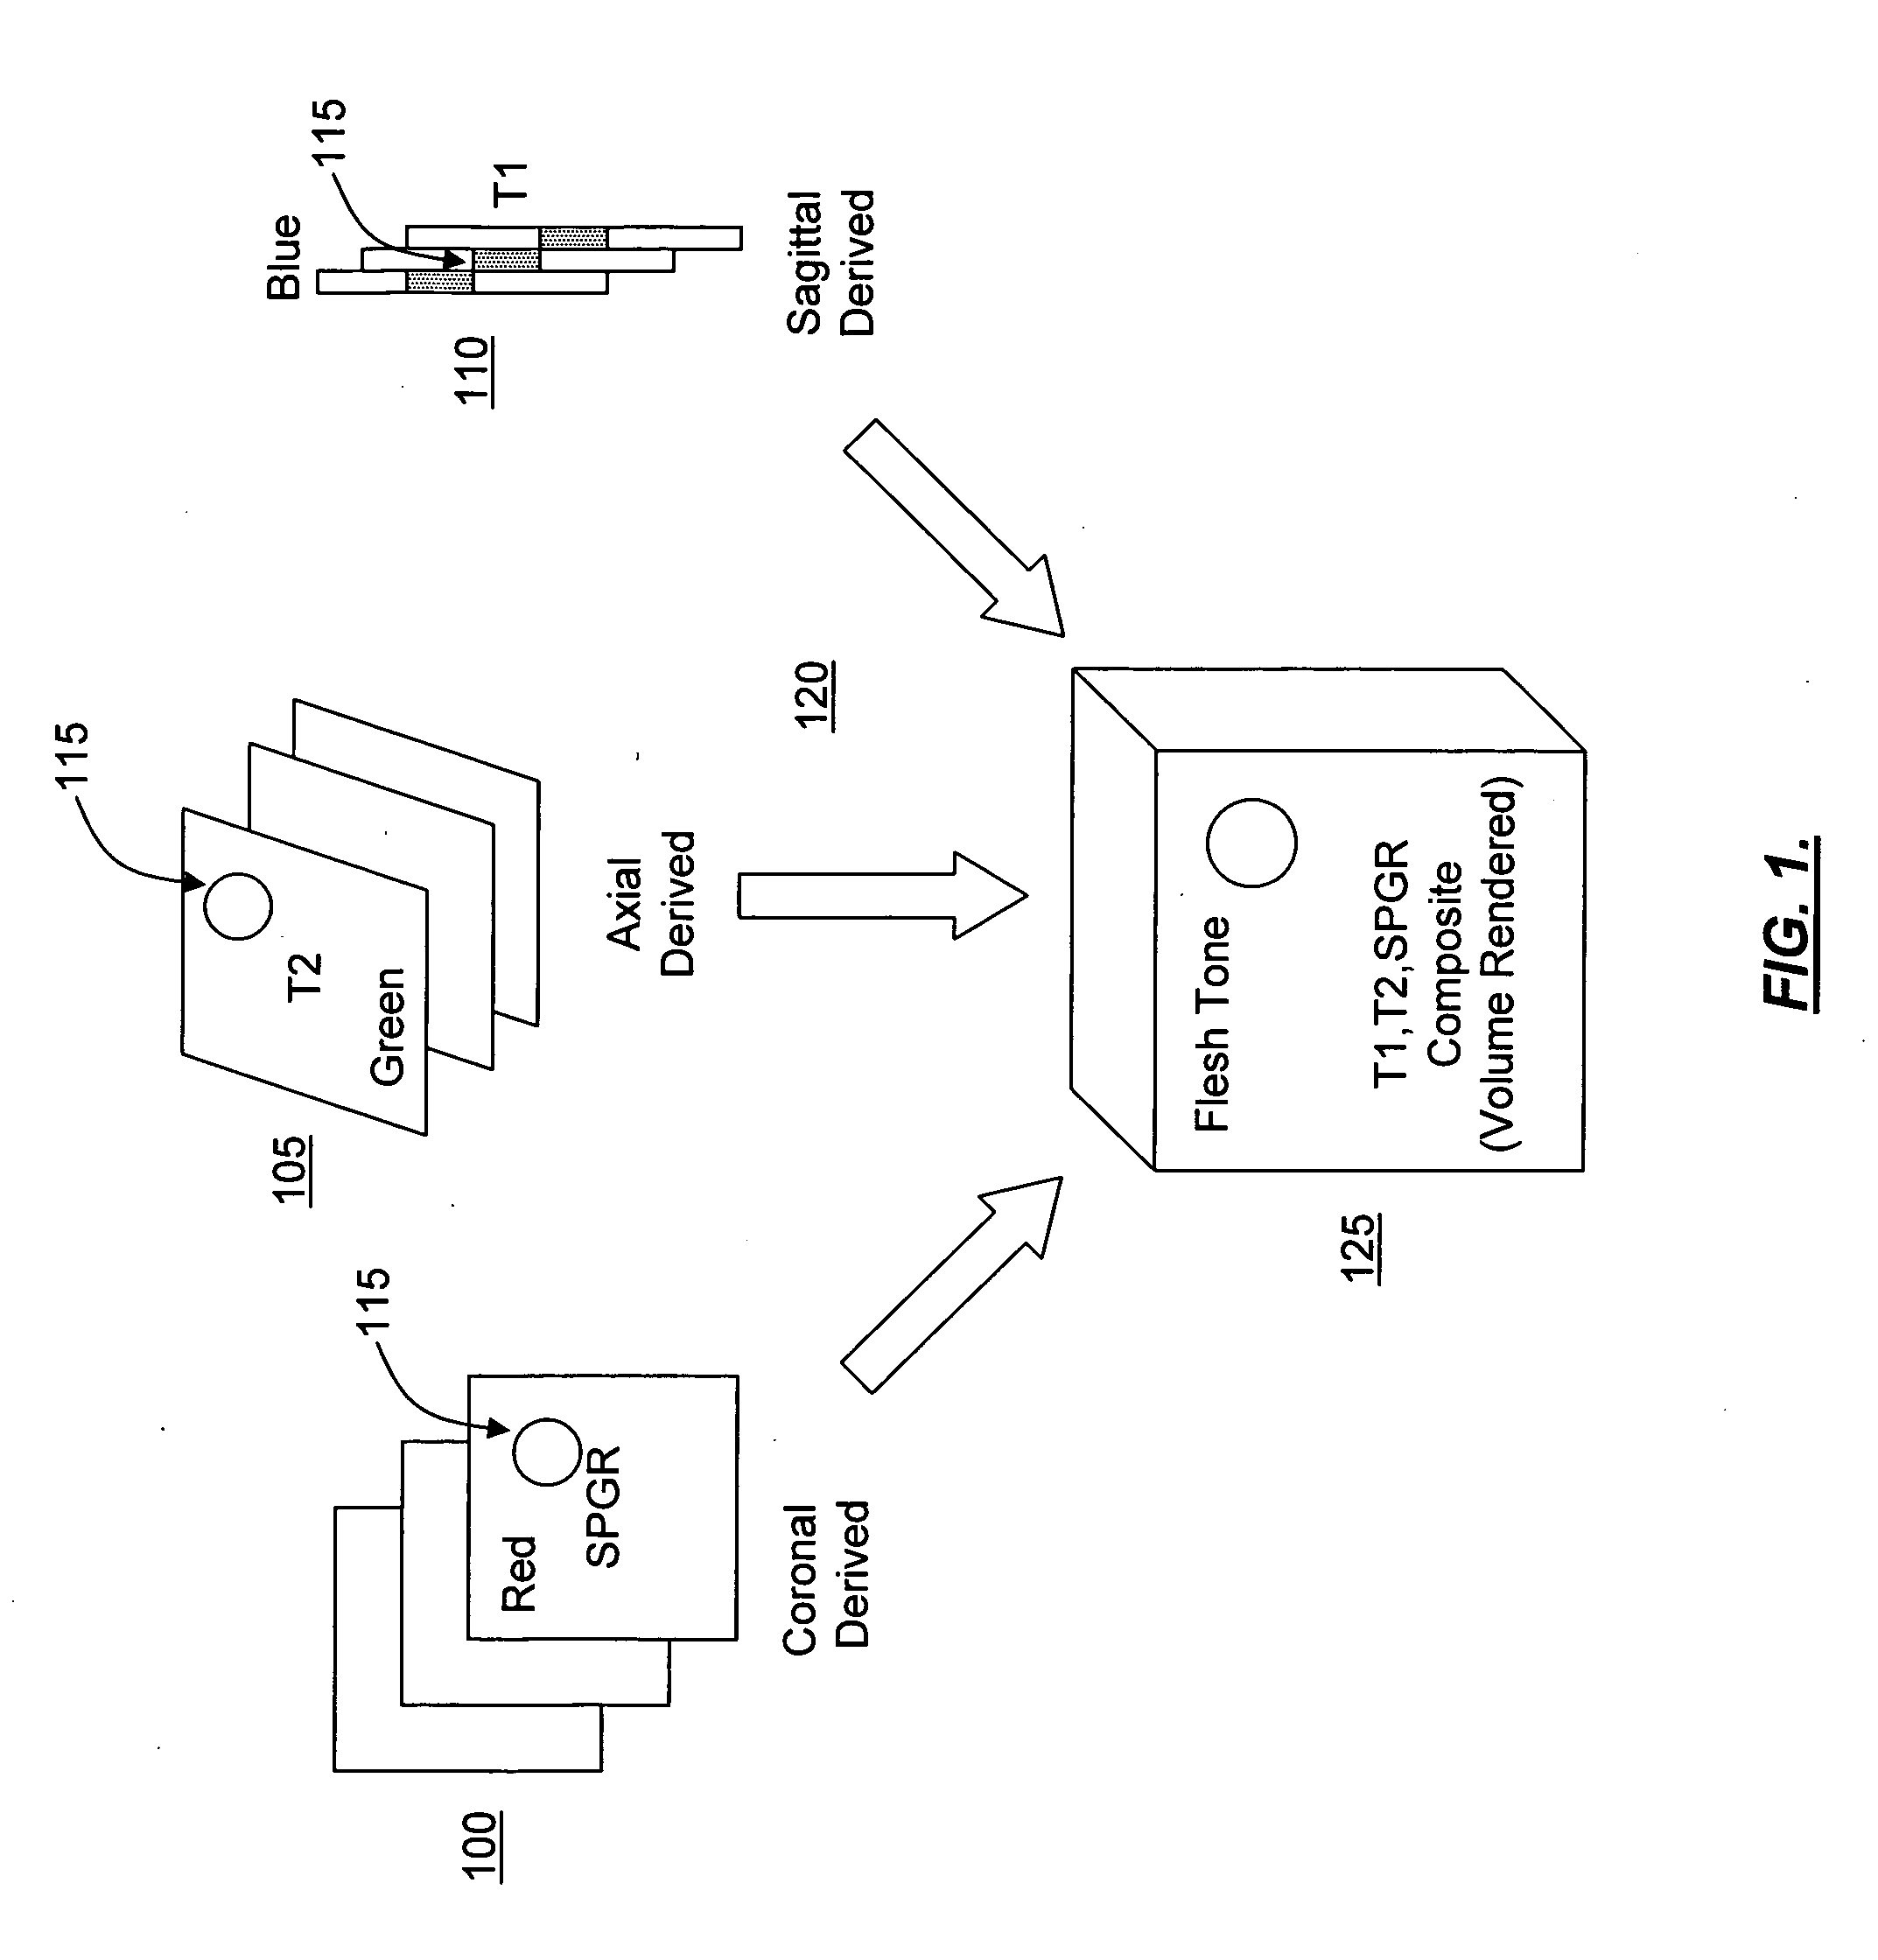 Opposed orthogonal fusion system and method for generating color segmented MRI voxel matrices